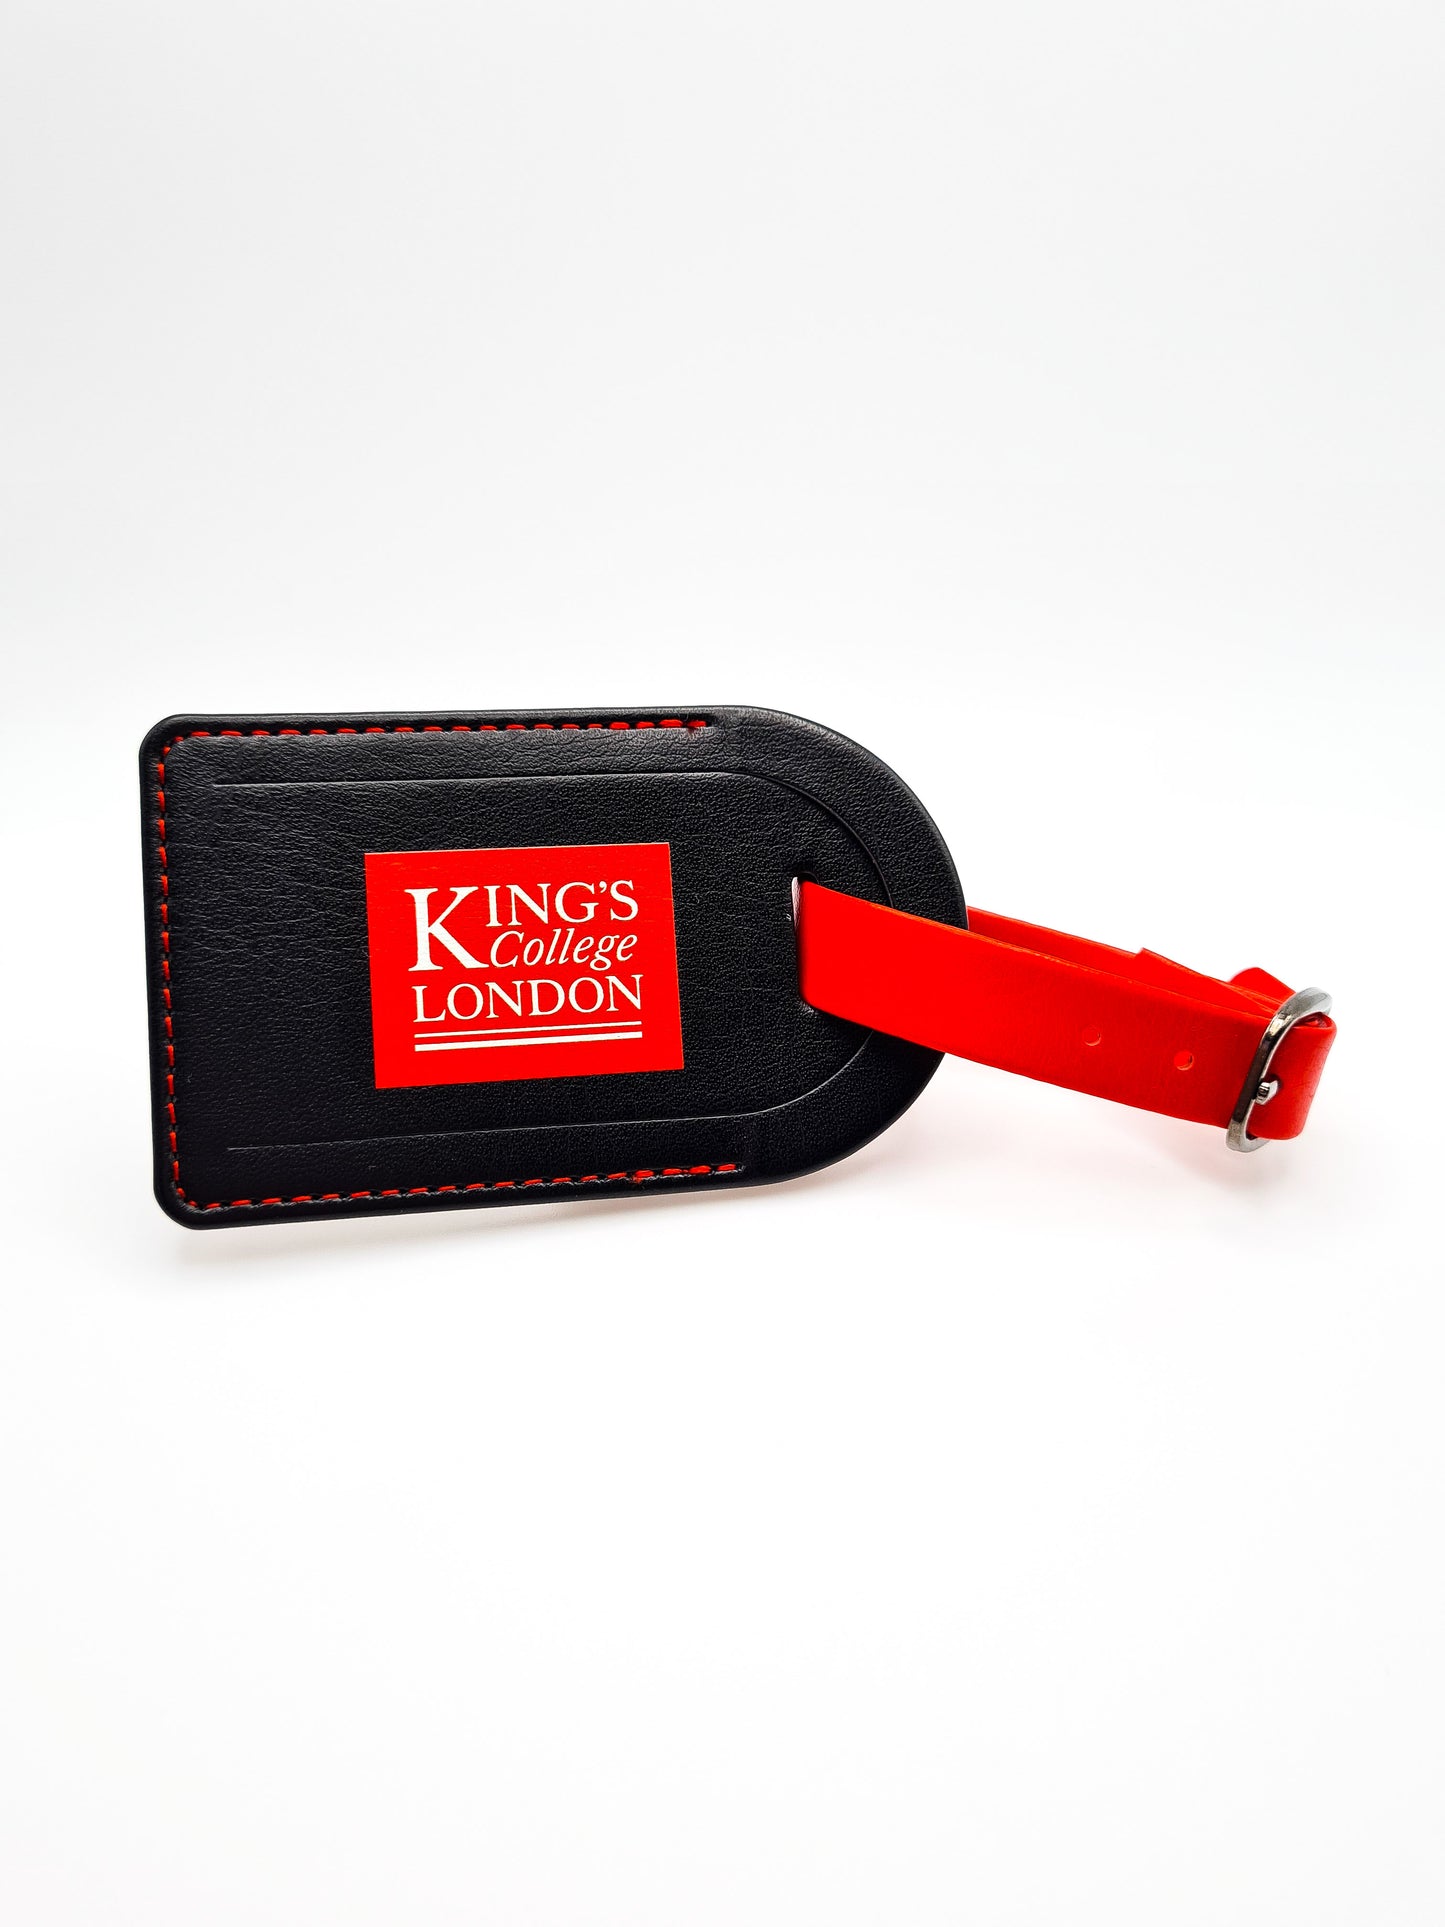 King's College London Luggage Tag